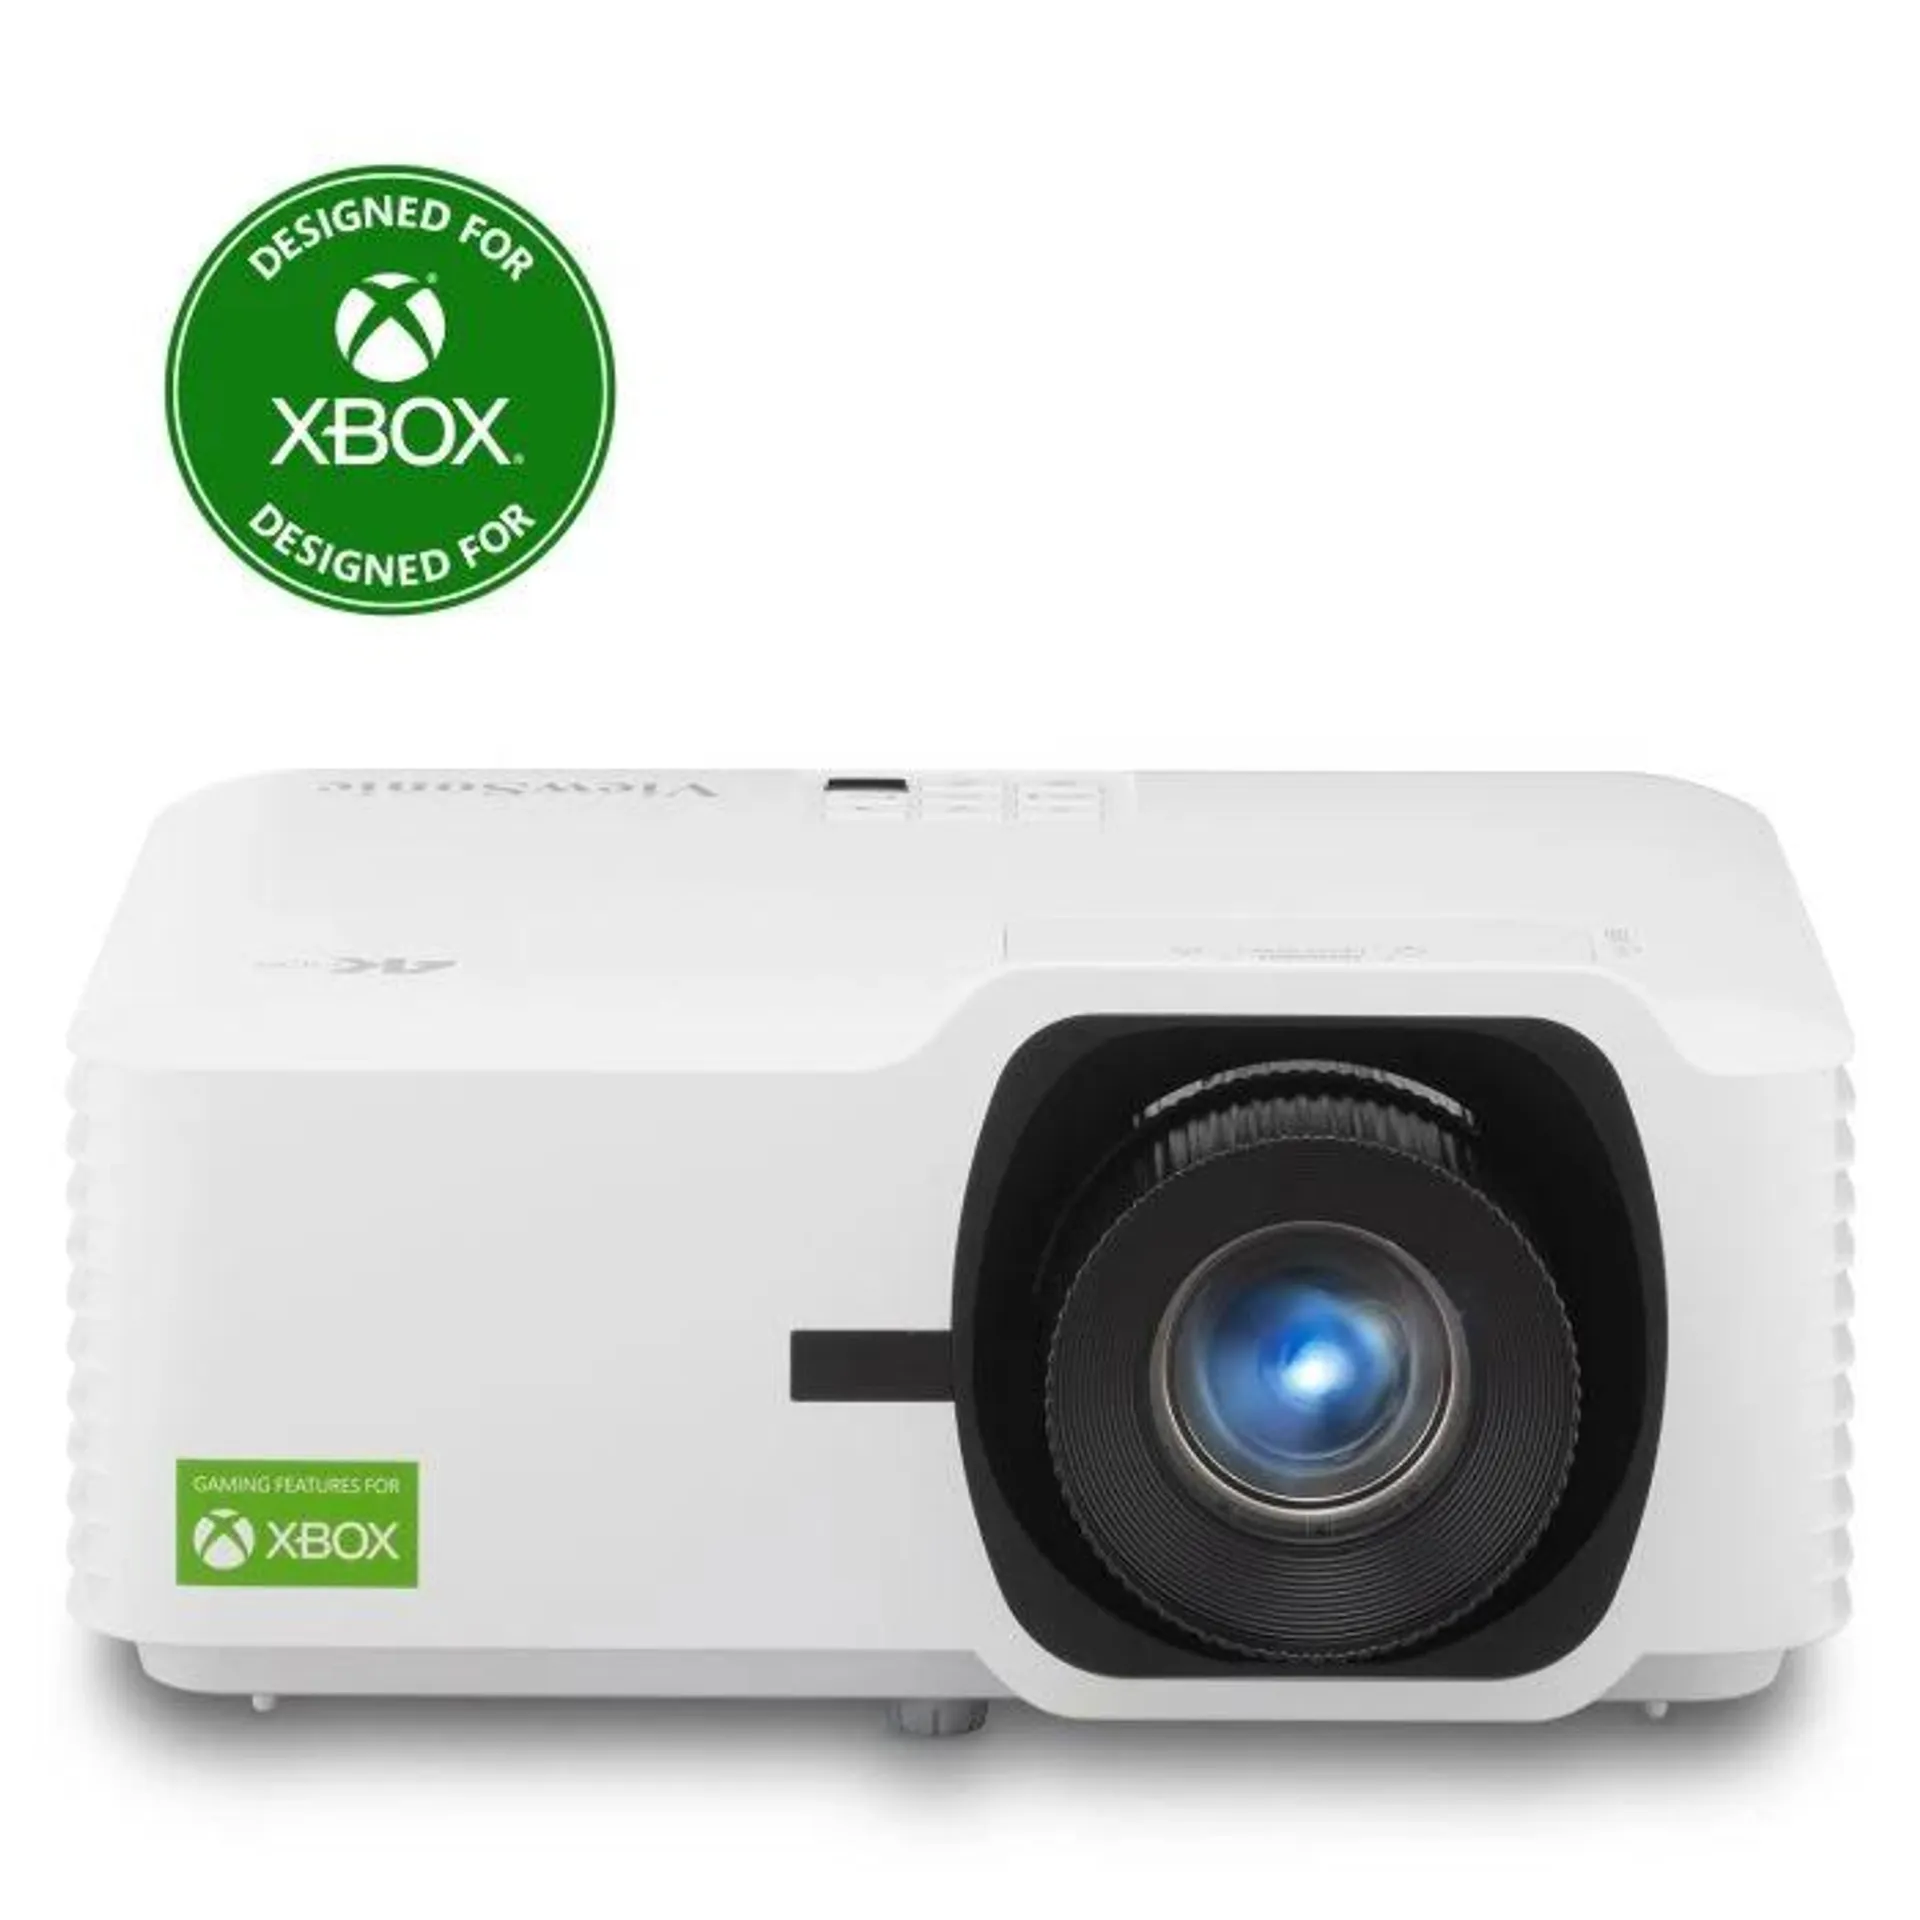 LX700-4K - 4K UHD Laser Gaming Projector Designed for Xbox (3,500 ANSI Lumens, Up to 240Hz Refresh Rate)